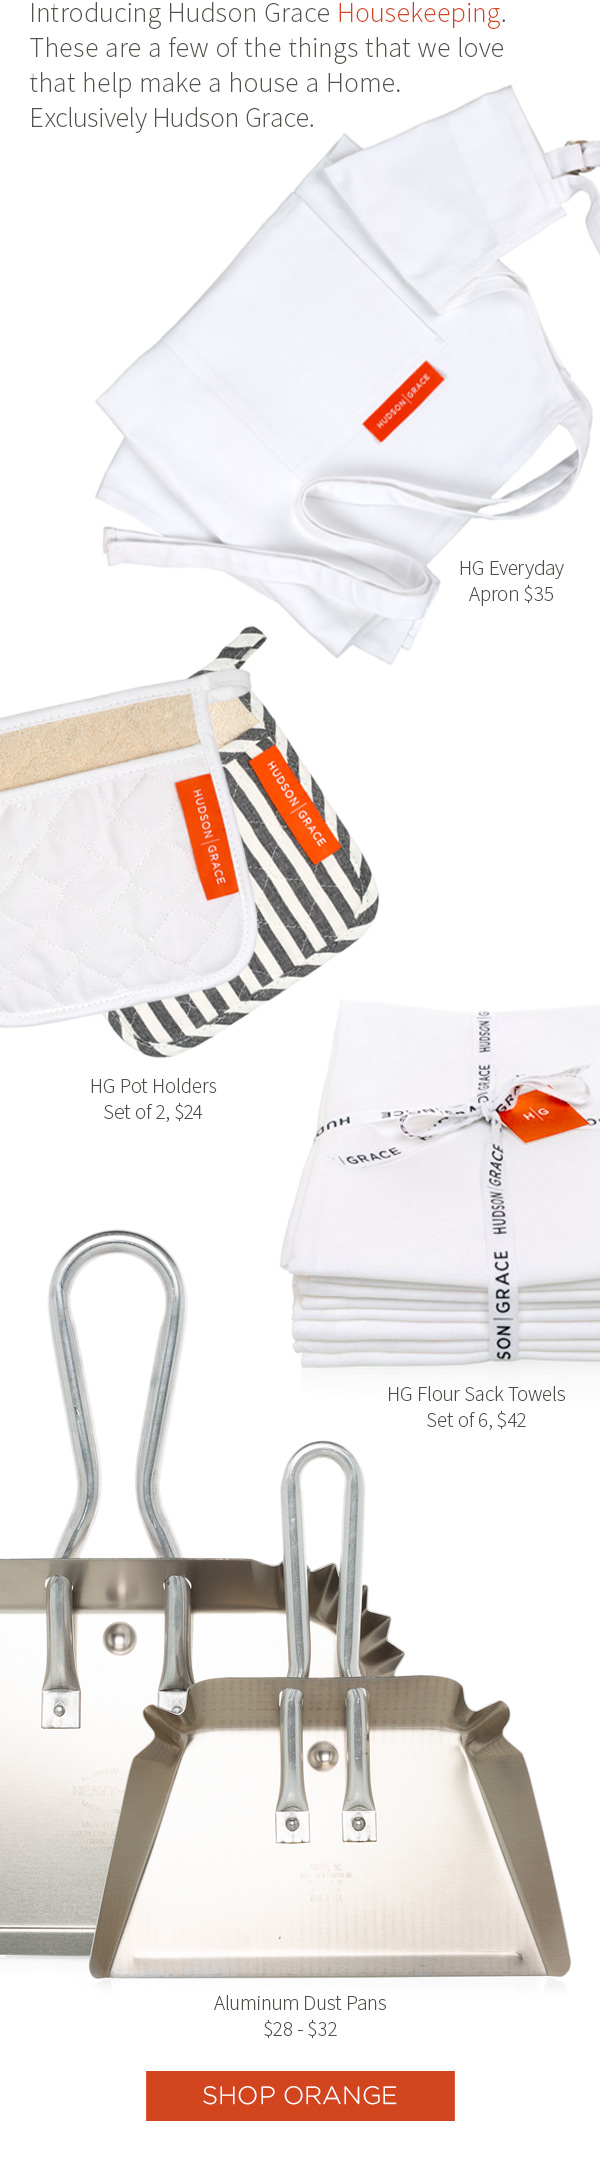 Introducing Hudson Grace Housekeeping.?These are a few of the things that we love that help make a house a Home.?Exclusively Hudson Grace. HG Everyday - Apron $35. HG Pot Holders - Set of 2, $24. HG Flour Sack Towels - Set of 6, $42. Aluminum Dust Pans - $28 - $32. Shop Orange.